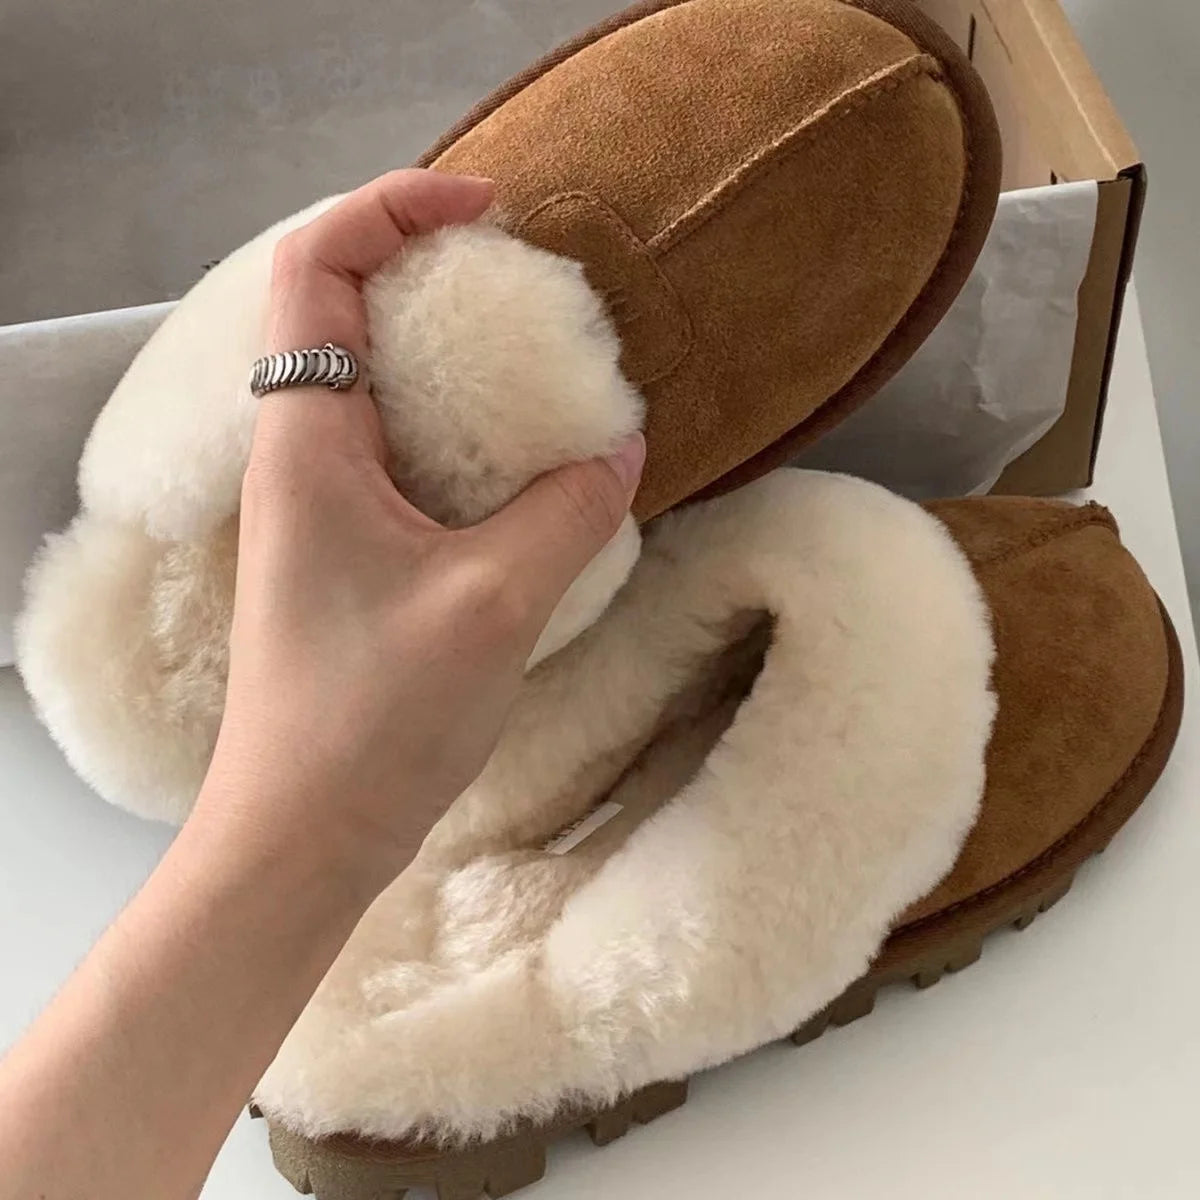 Brand Designer Women's Slippers Winter Plush Warm Shoes Unisex Indoor Outdoor Flip Flops Casual Shoes  Zapatos De Mujer - Charlie Dolly